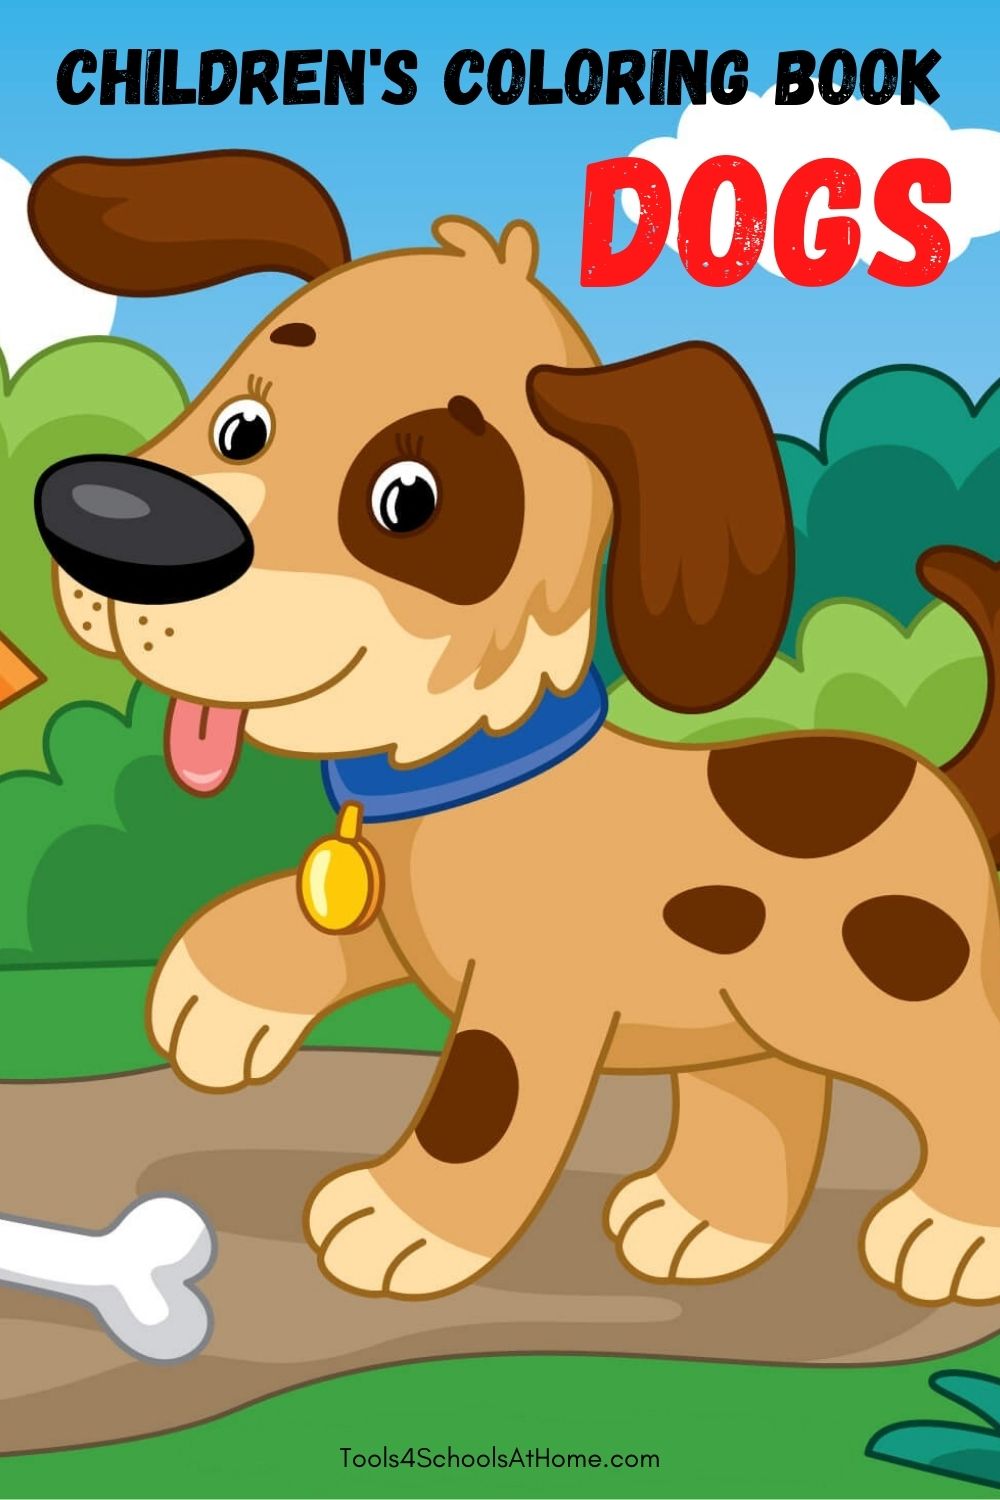 Children’s Coloring Book: Dogs – Tools 4 Schools at Home